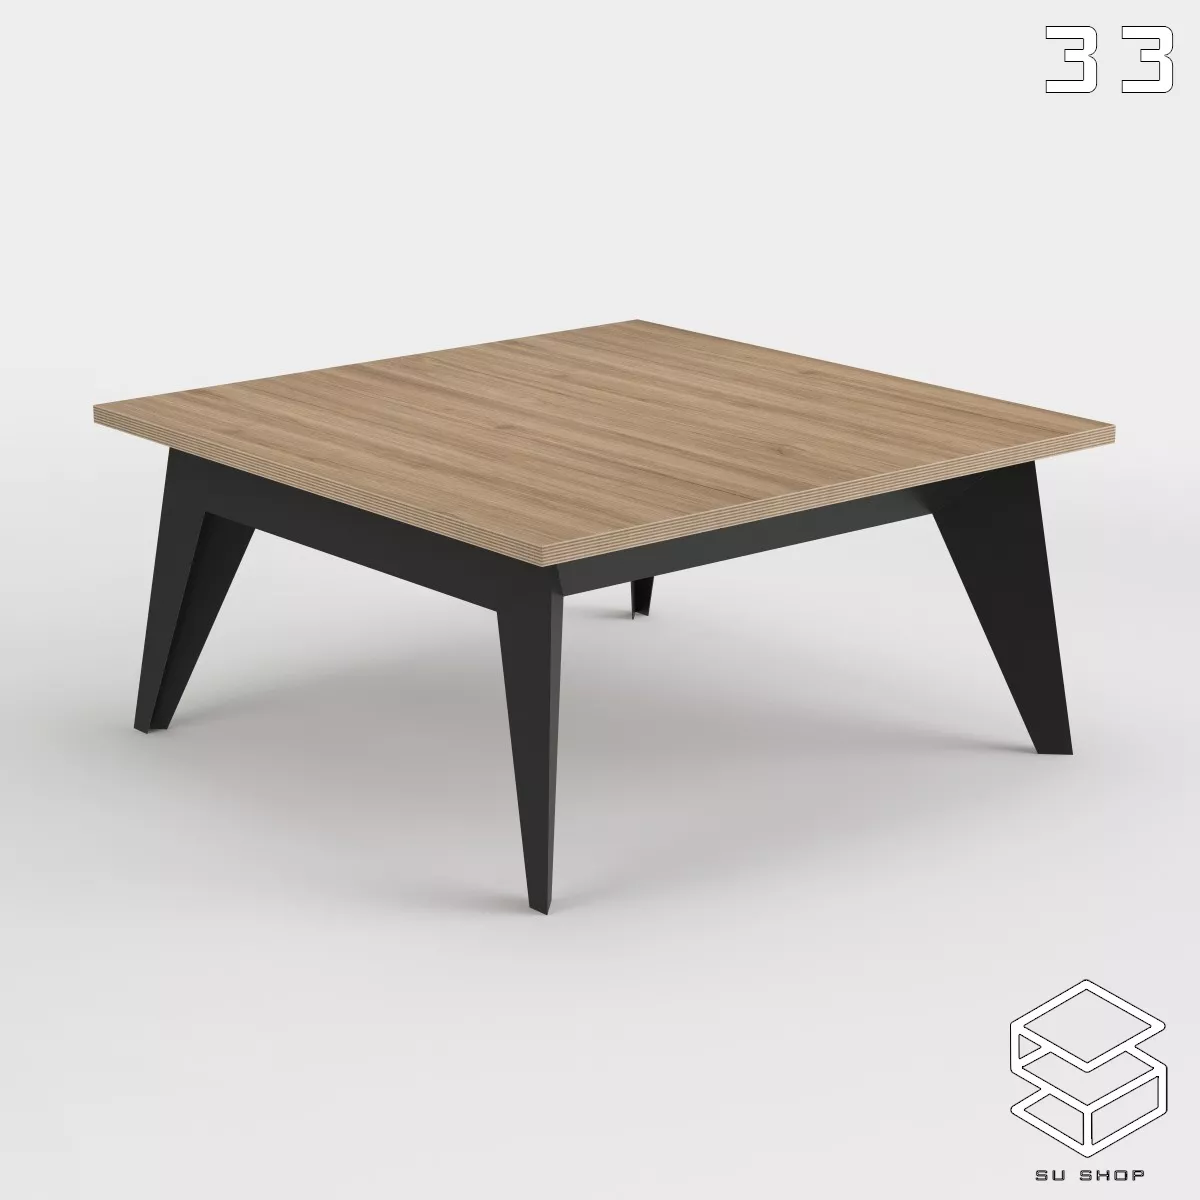 MODERN TEA TABLE - SKETCHUP 3D MODEL - VRAY OR ENSCAPE - ID15042